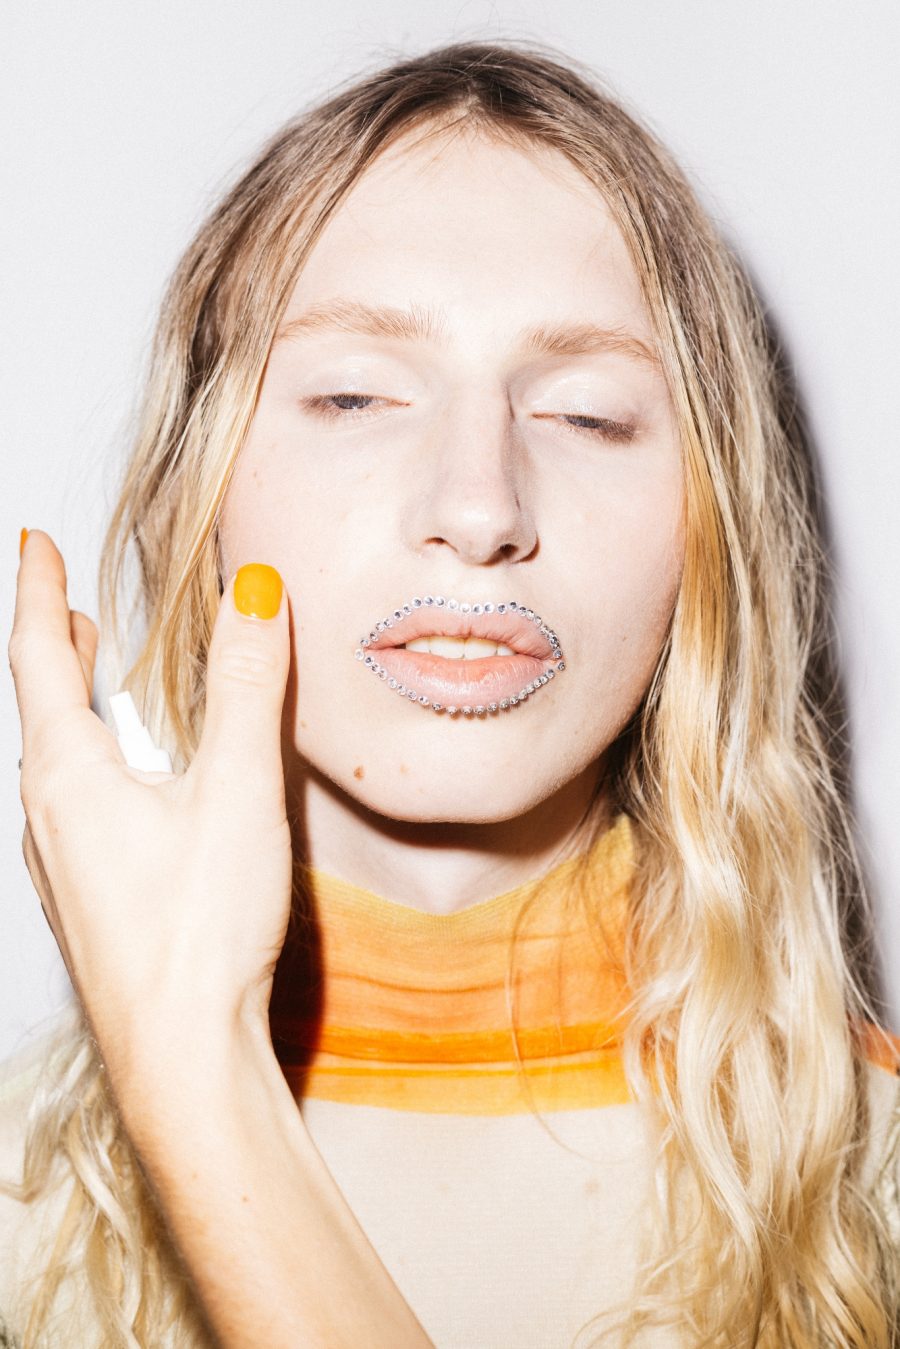 A close-up of a person wearing an orange top, orange nail polish and gems around their lips.